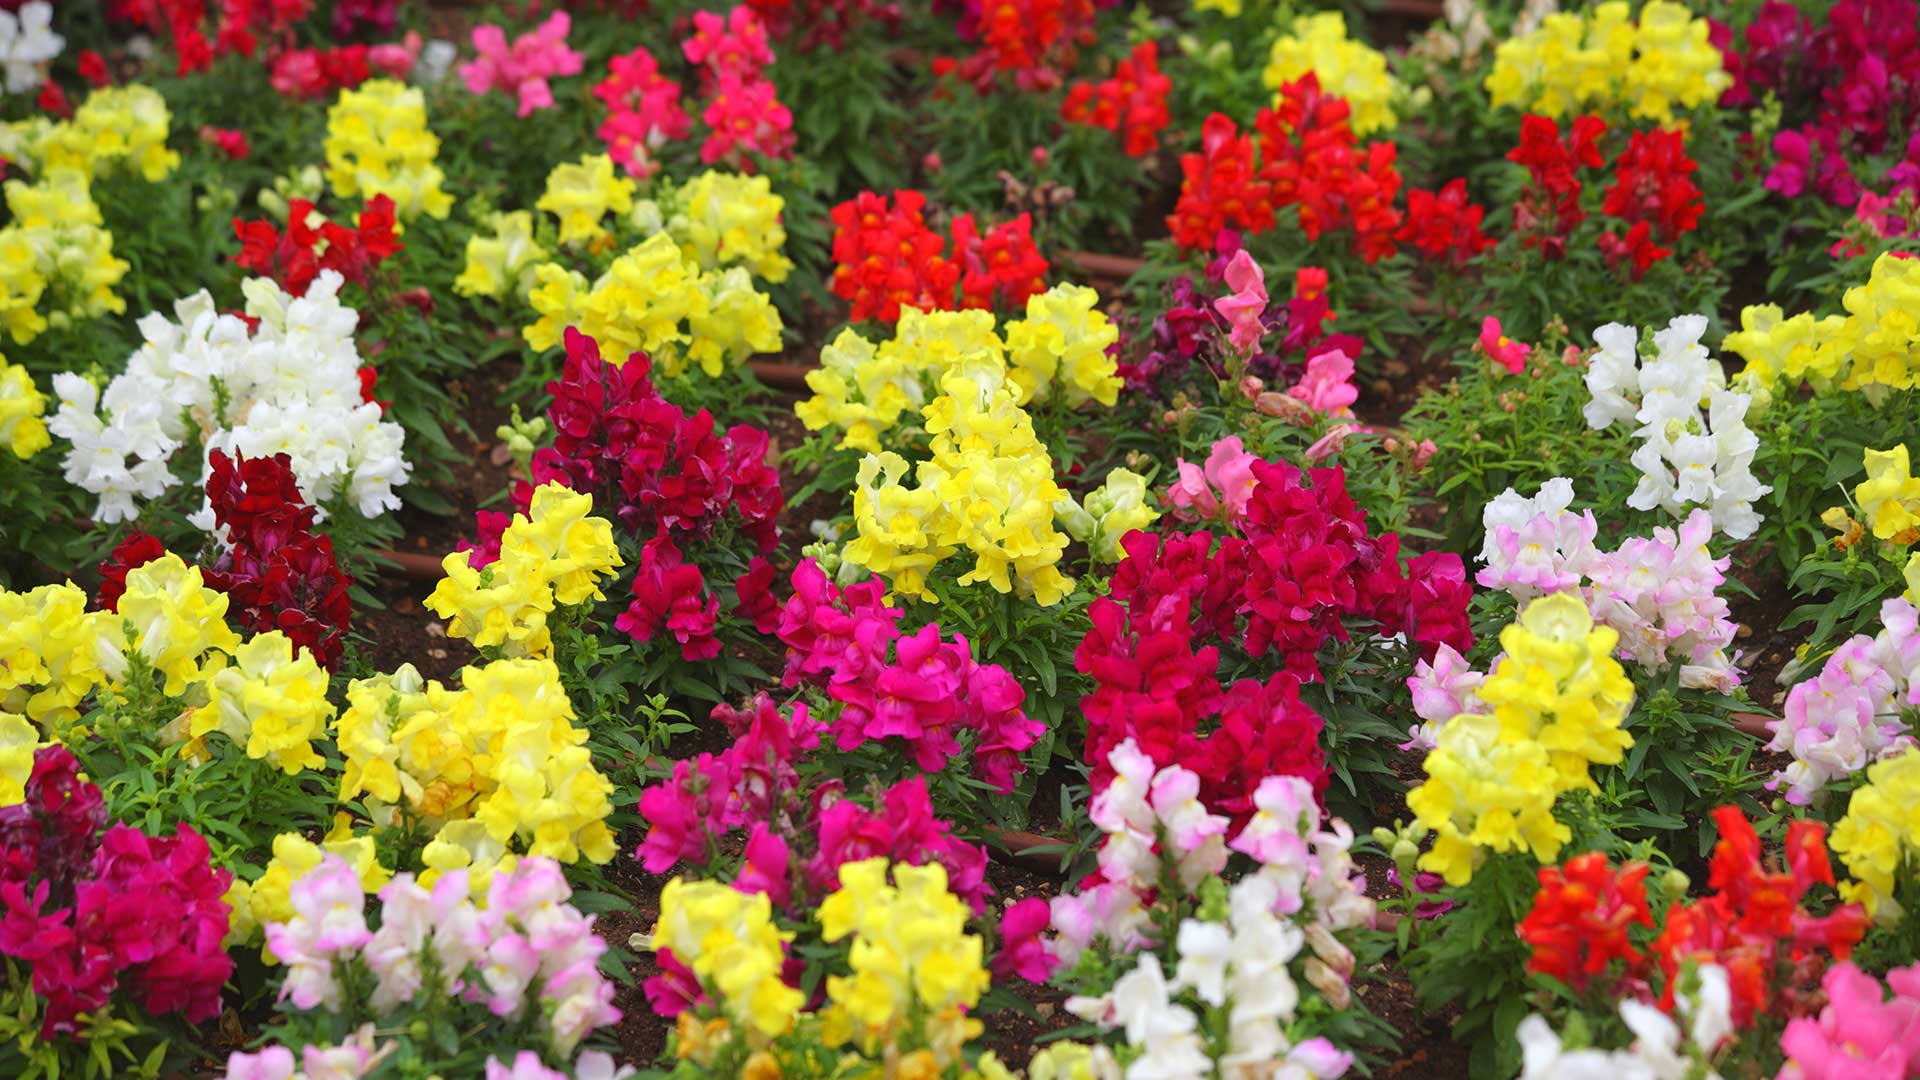 Brightly colored snapdragon flowers in bloom near Chesterfield, MI.